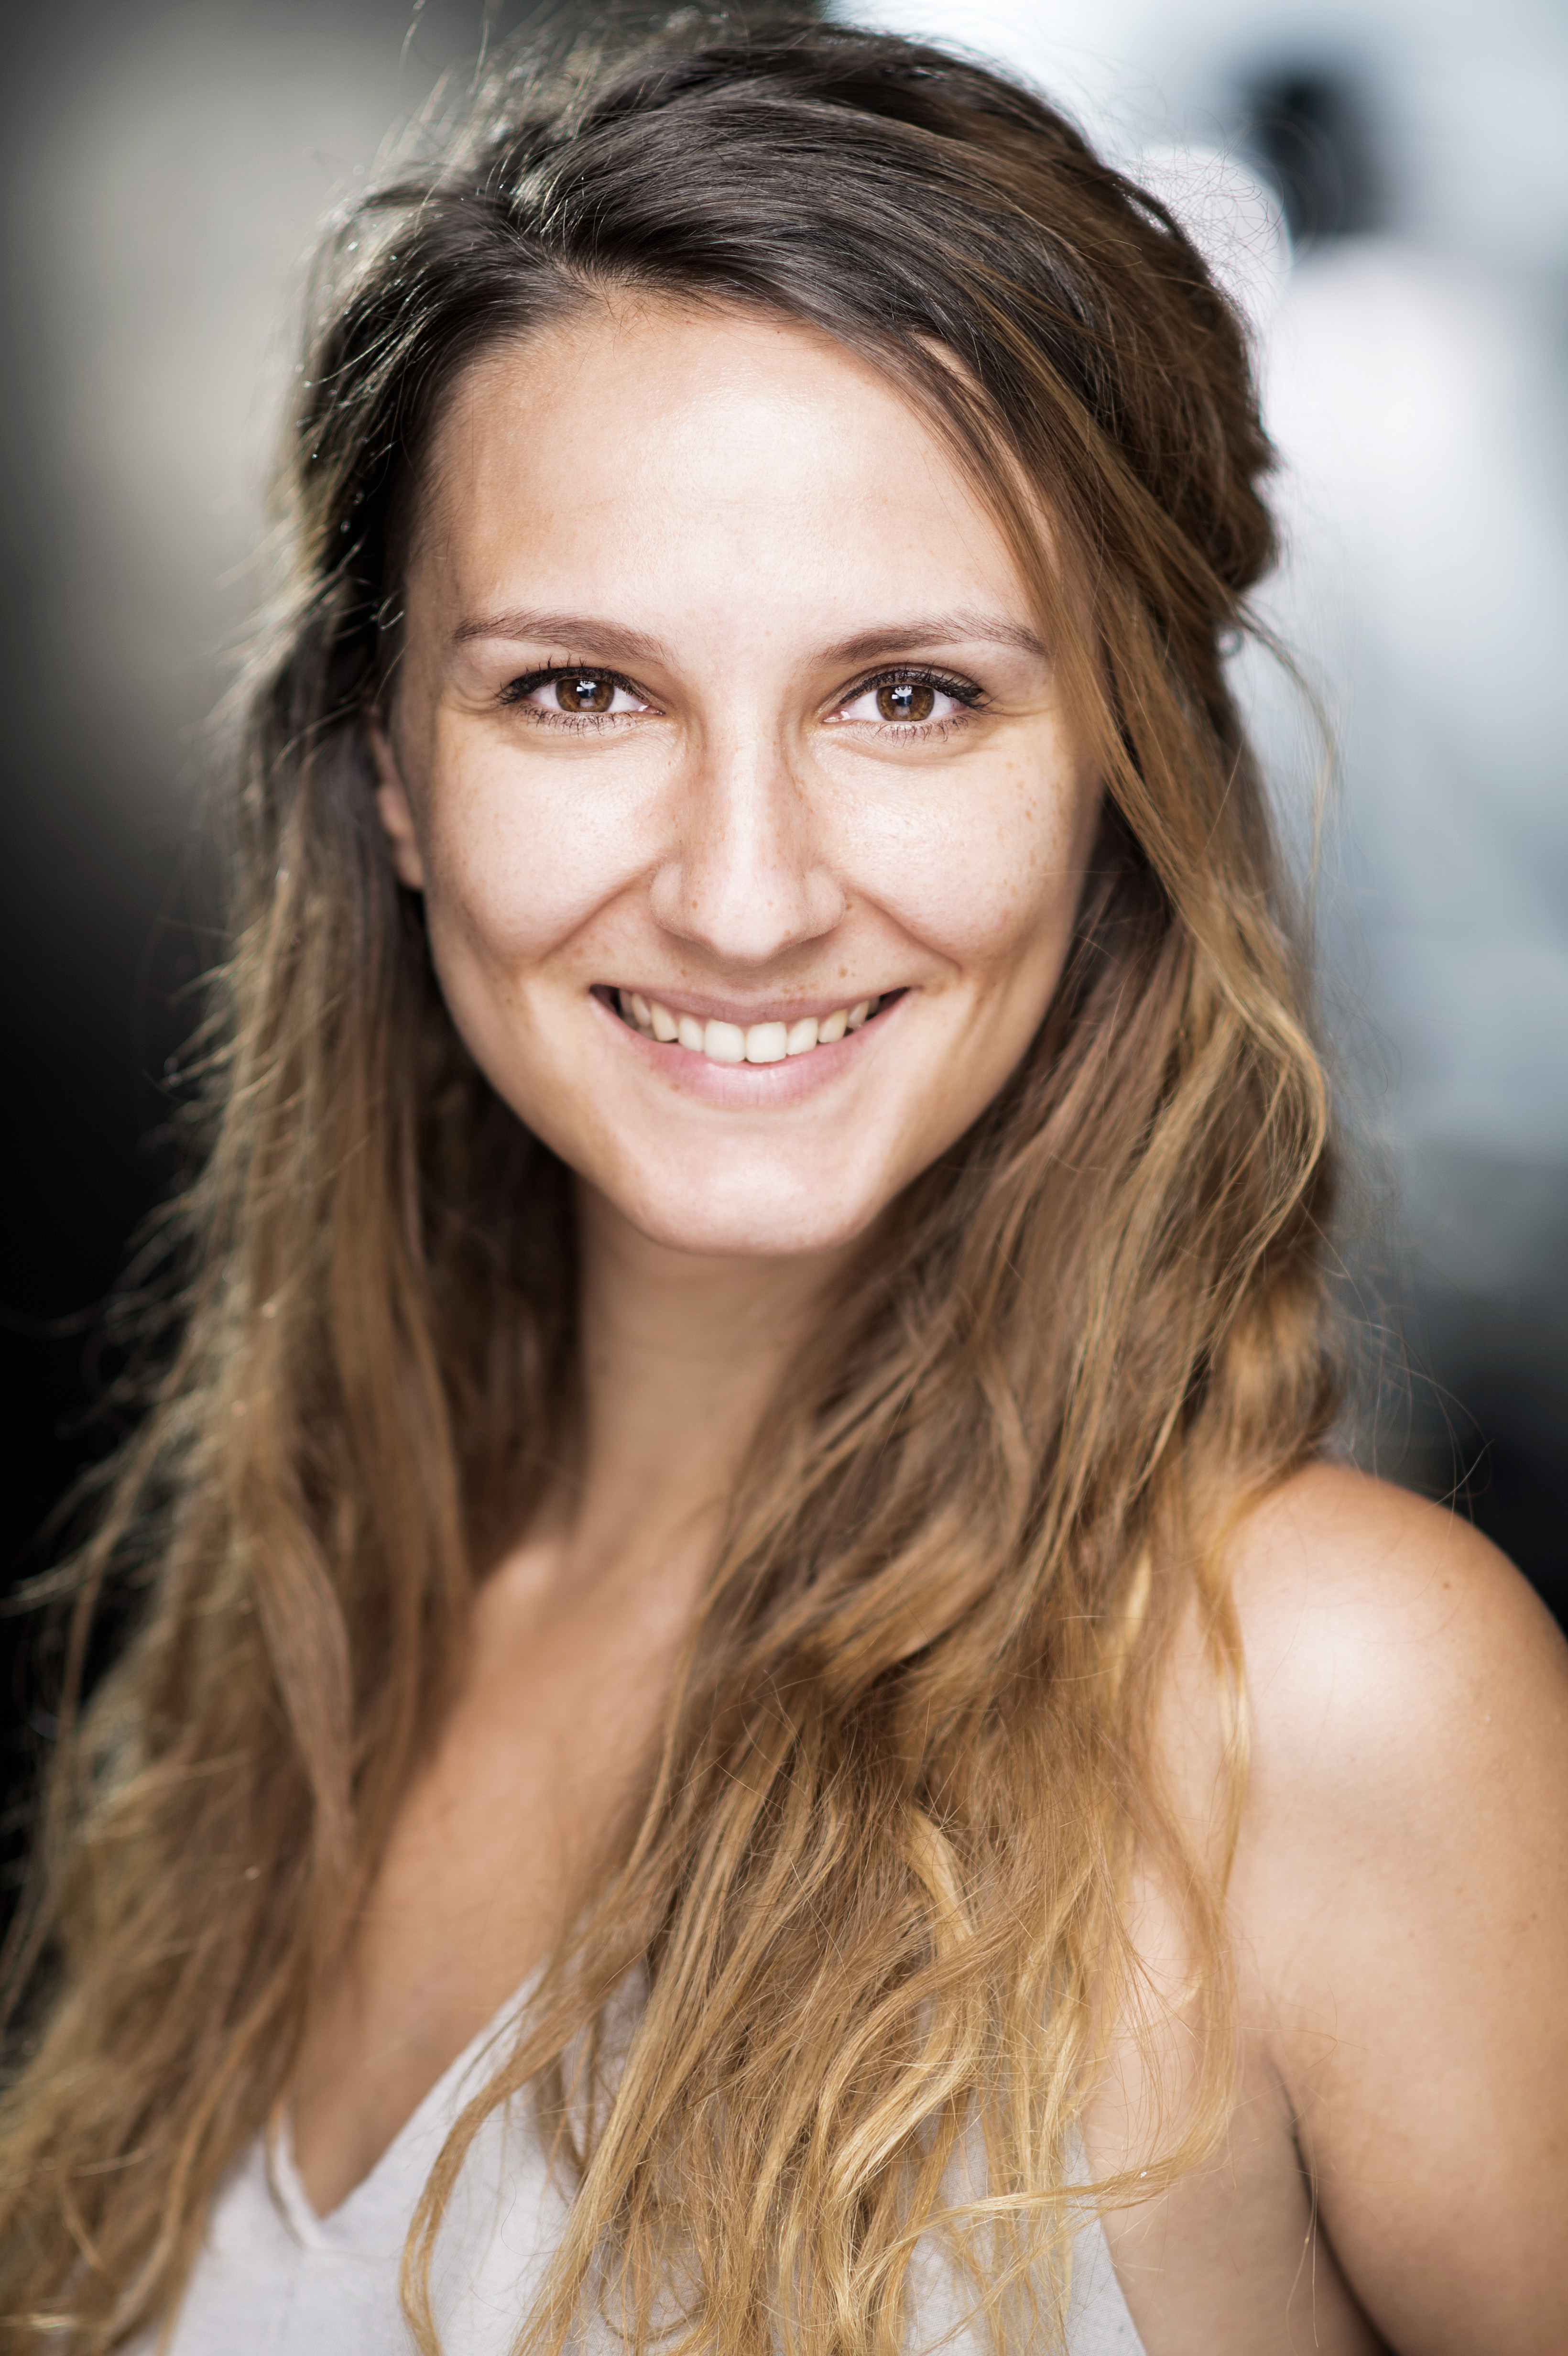 Theatre workshops in Luxembourg: Maya Moes leading them